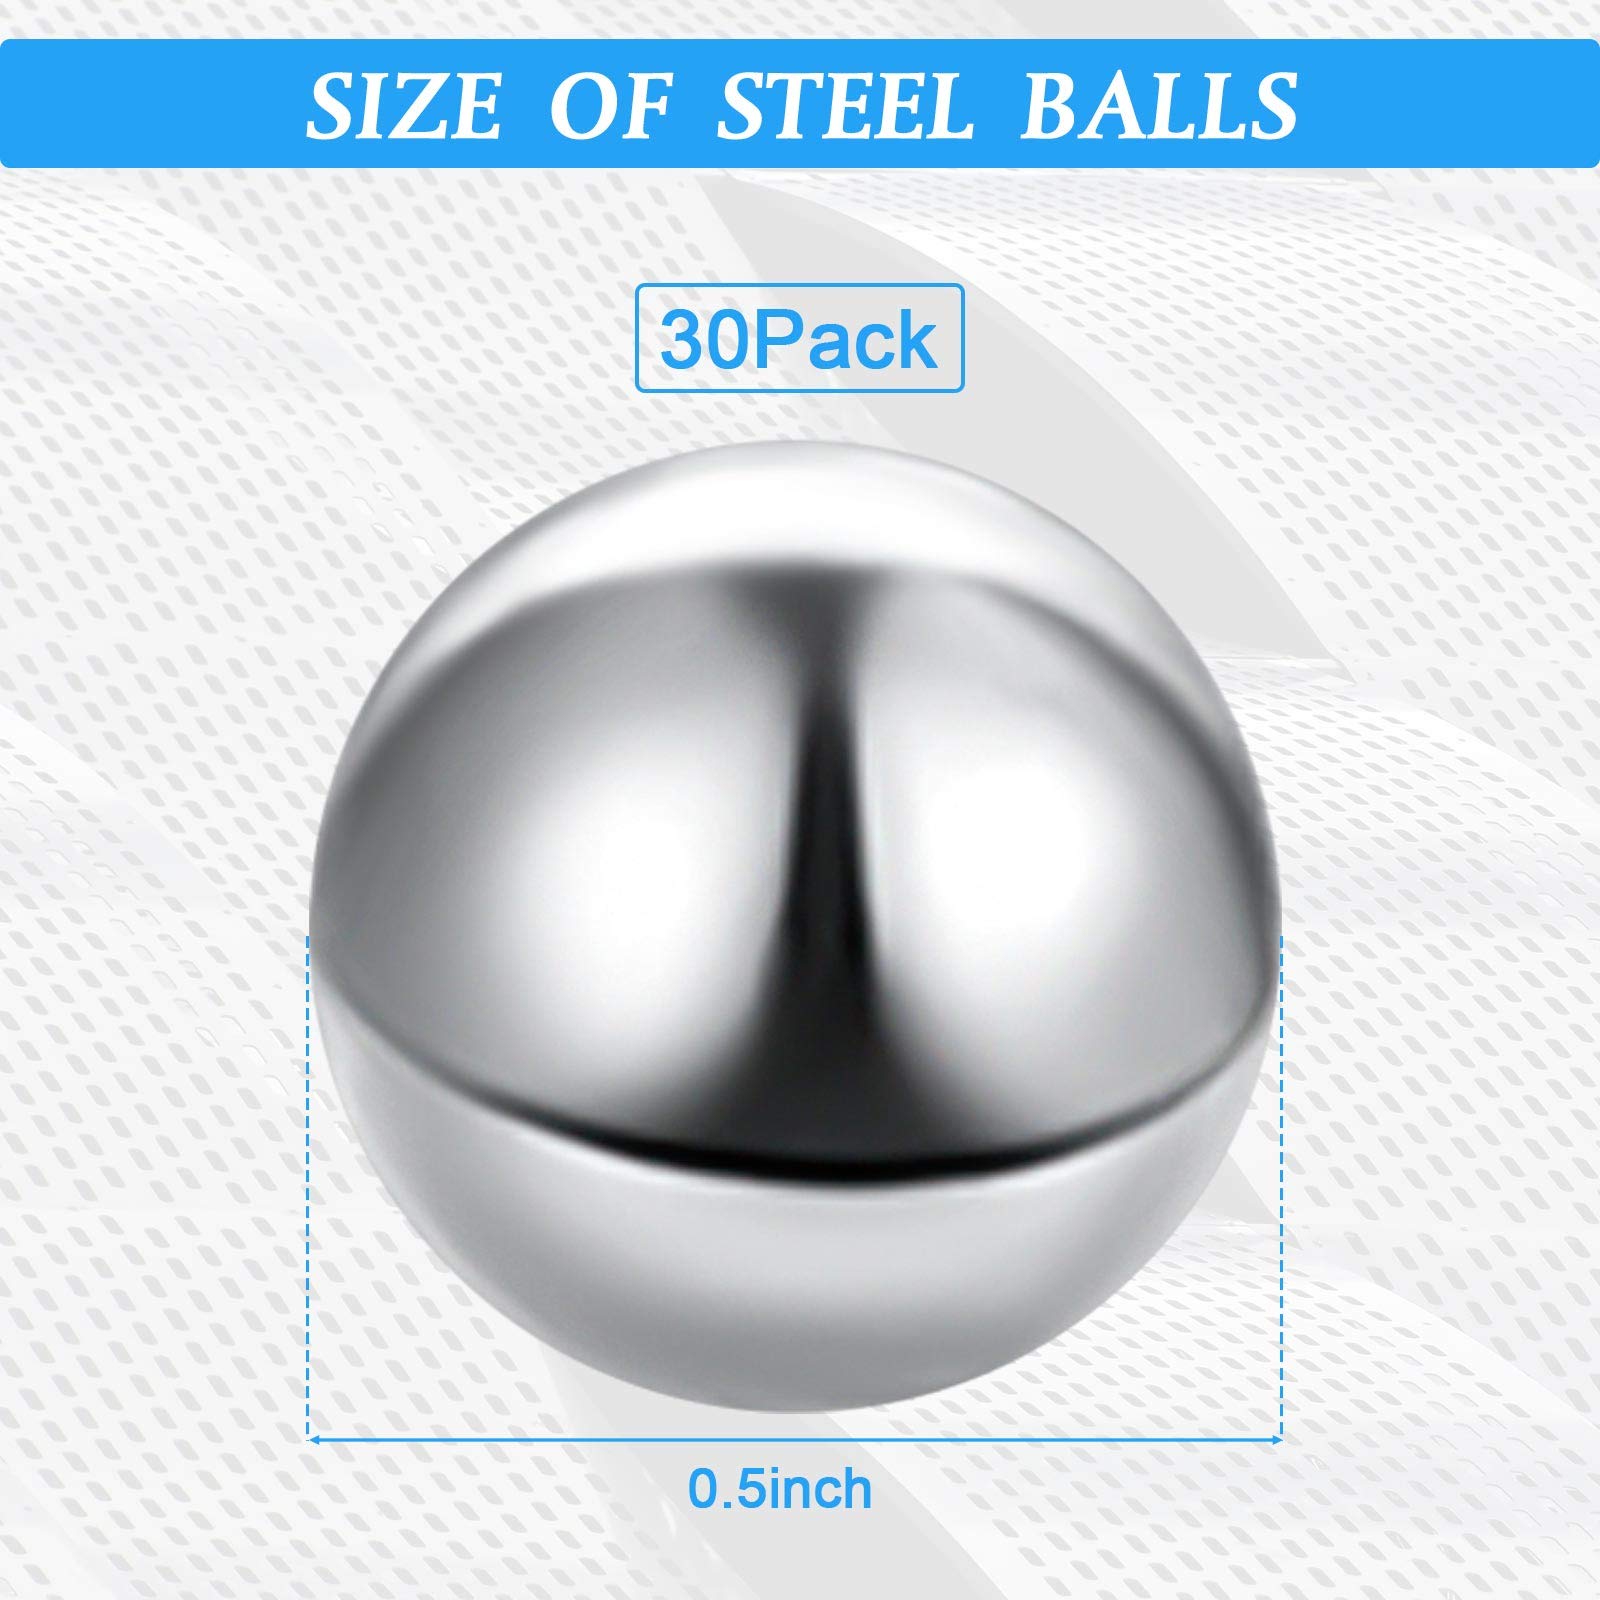 30 Pieces Labyrinth Replacement Steel Balls 0.5 Inch Replacement Balls Rust-Proof Metal Balls for Marble Runs